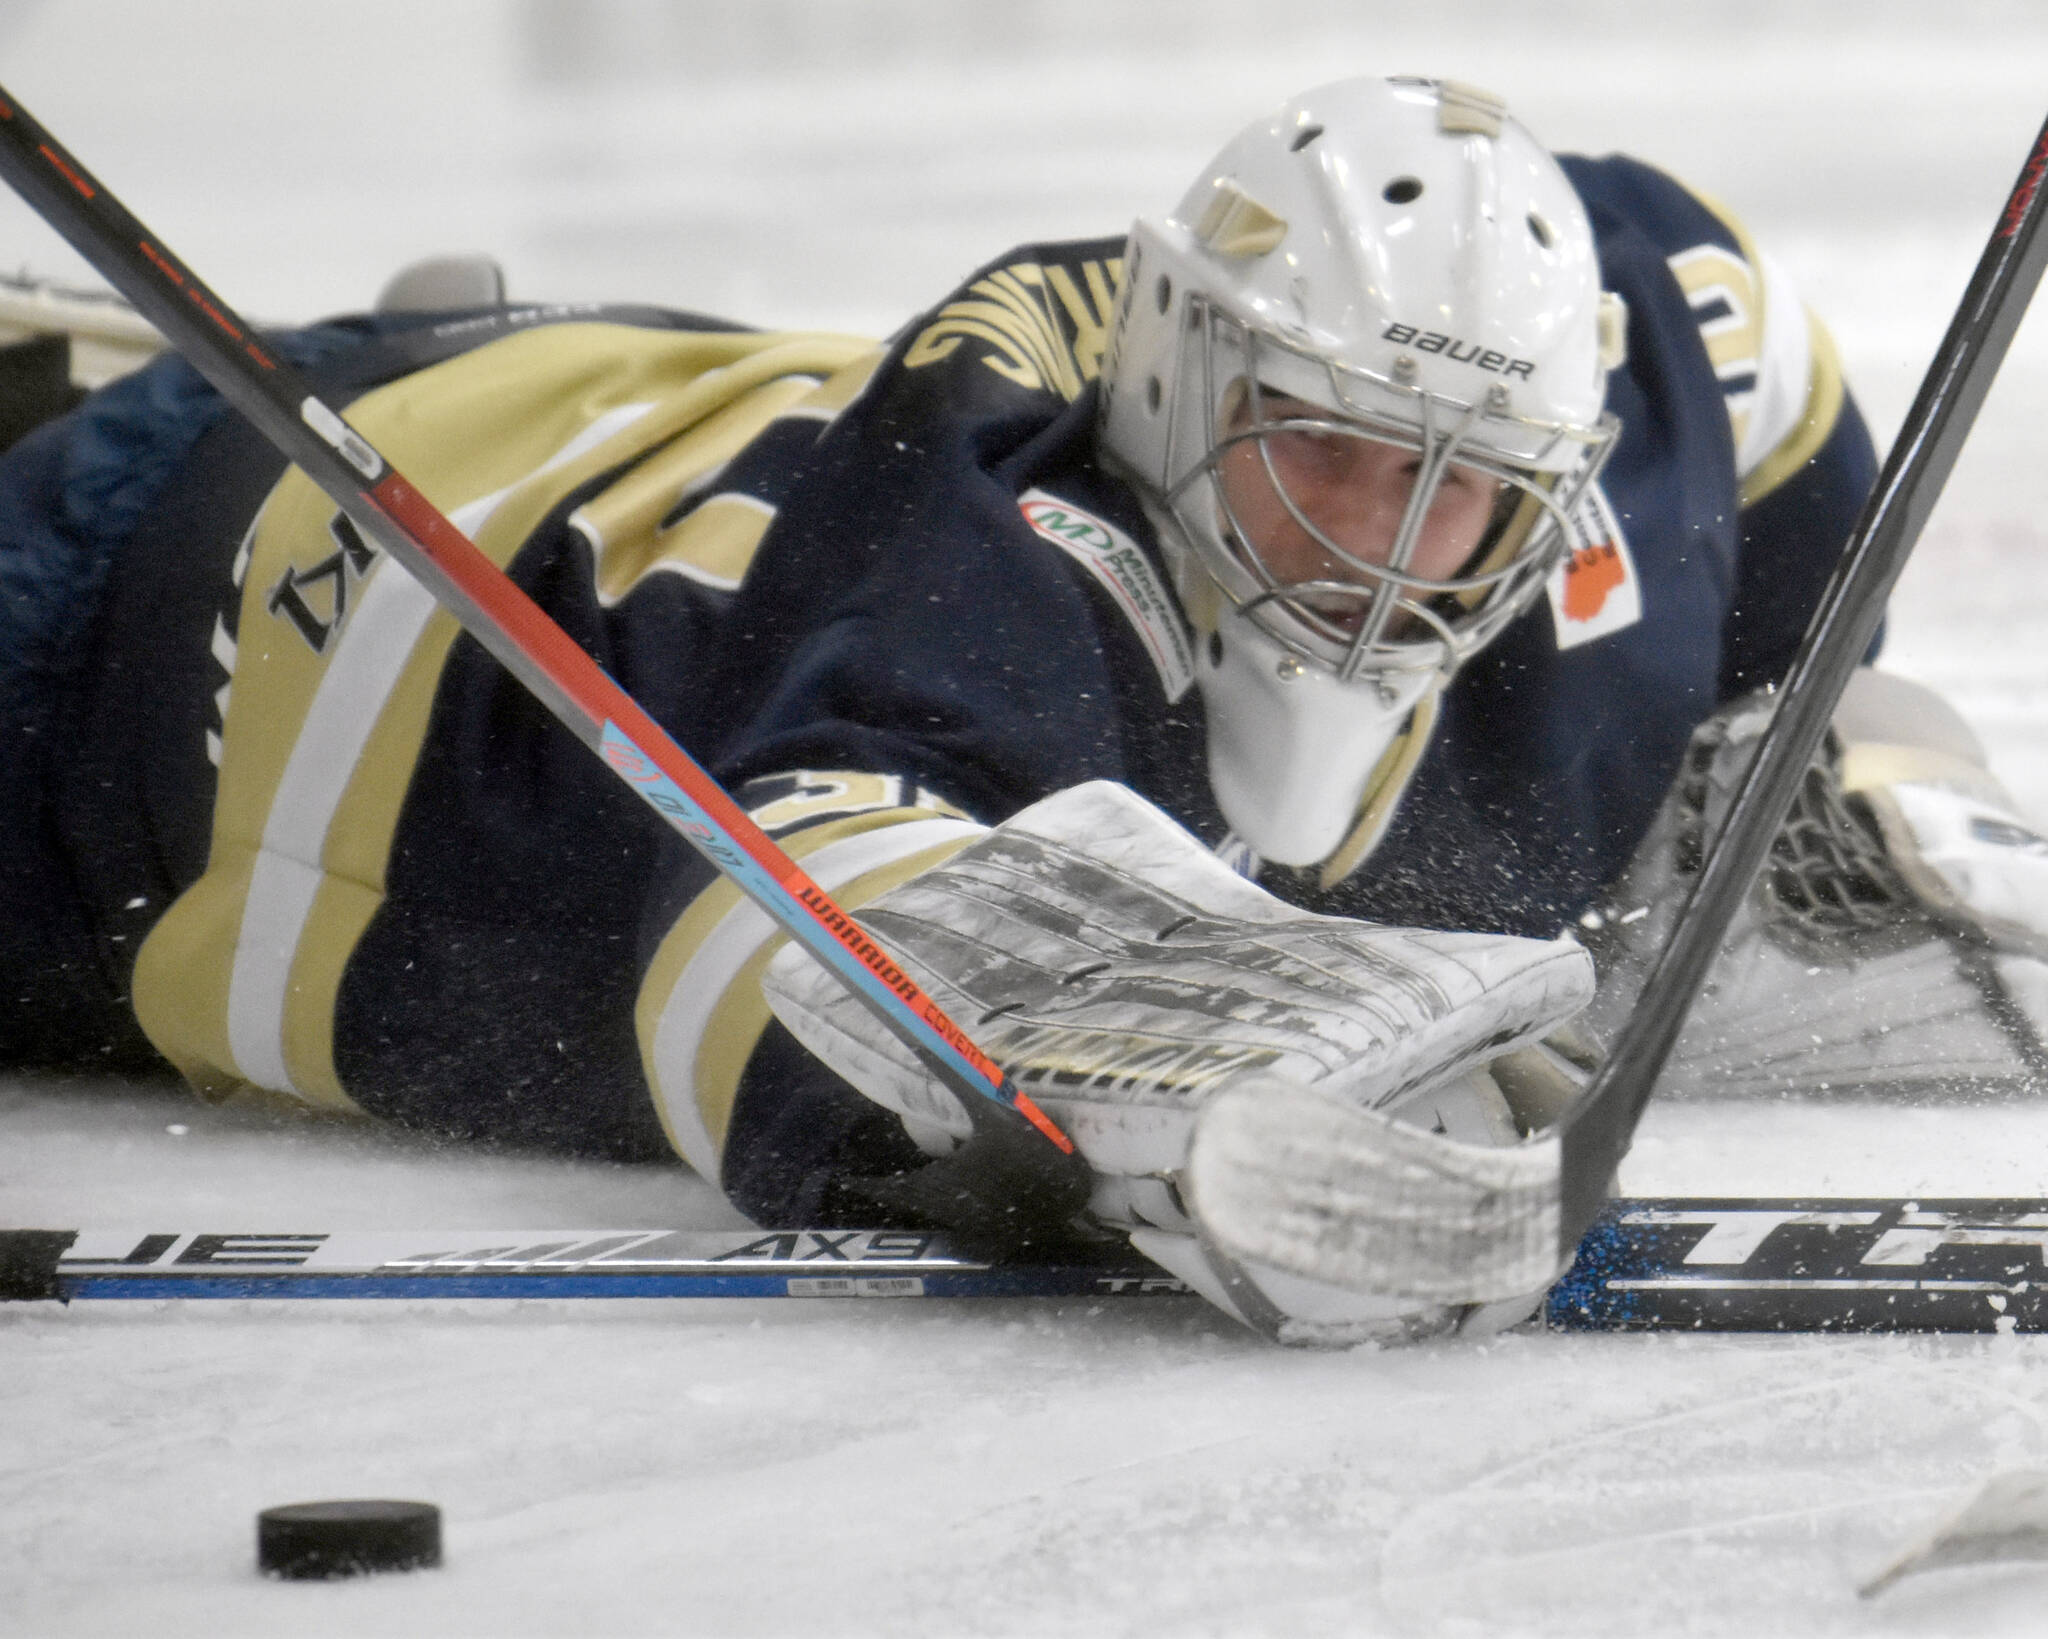 Janesville (Wisconsin) Jets goalie Peter Sterling tries to corral the puck Saturday, Feb. 25, 2023, at the Soldotna Regiona Sports Complex in Soldotna, Alaska. (Photo by Jeff Helminiak/Peninsula Clarion)